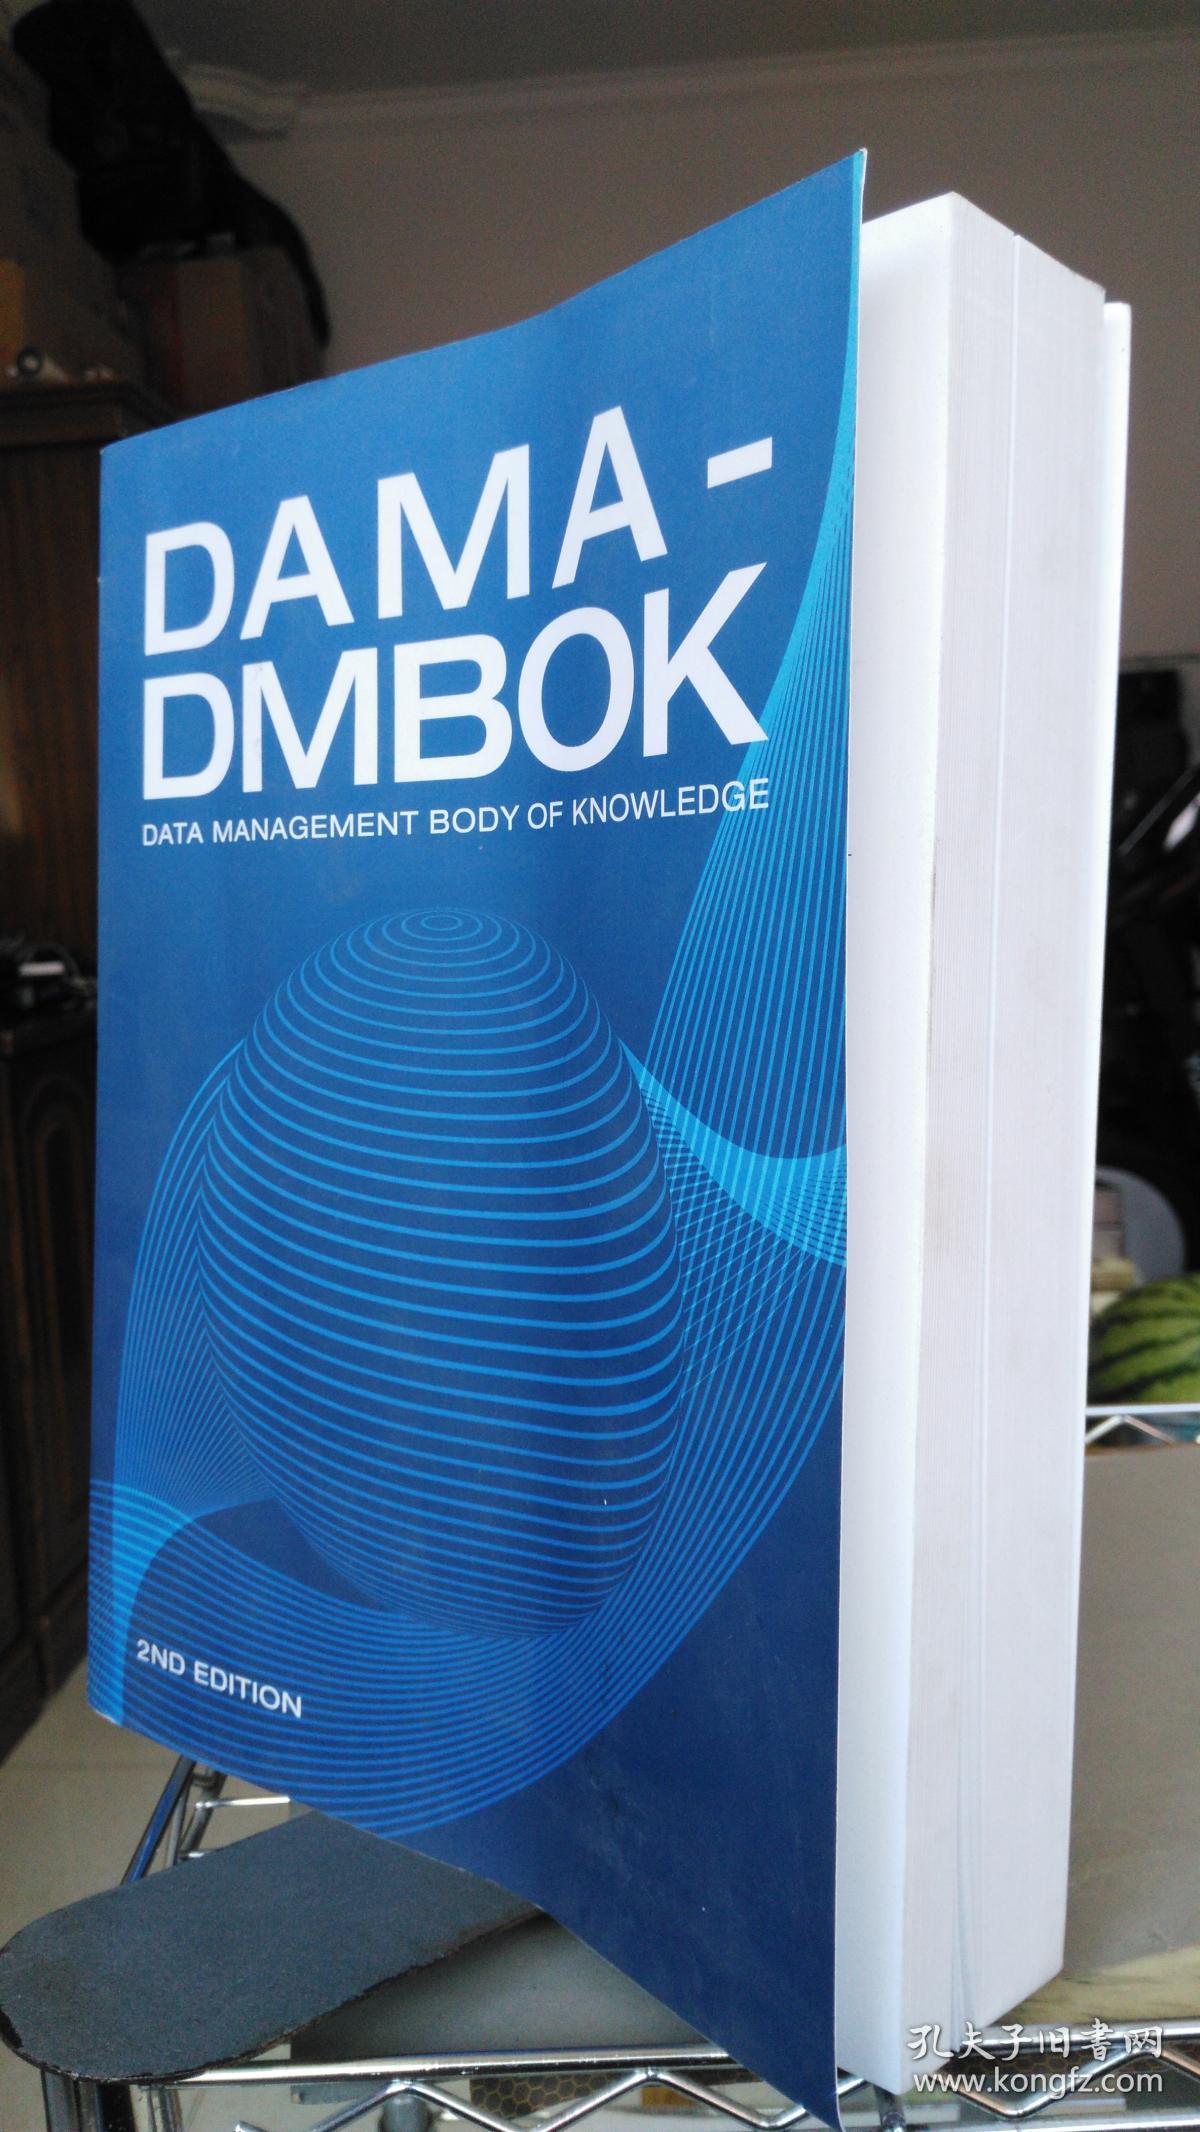 DAMA-DMBOK: Data Management Body of Knowledge (2nd Edition) mobi  book